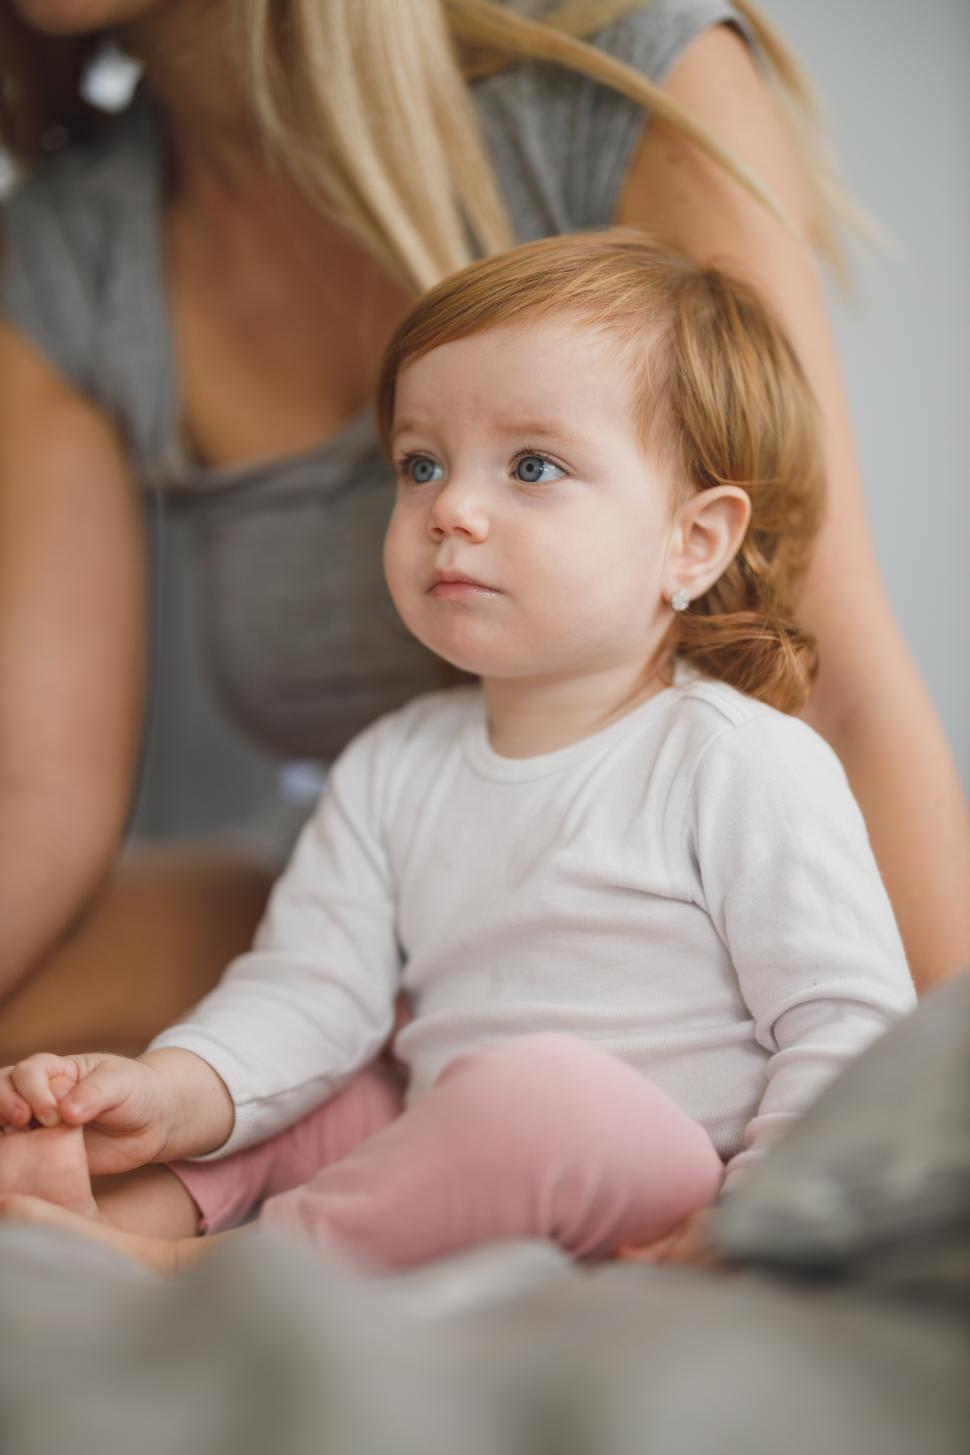 Free Image of Little baby girl with red hair 